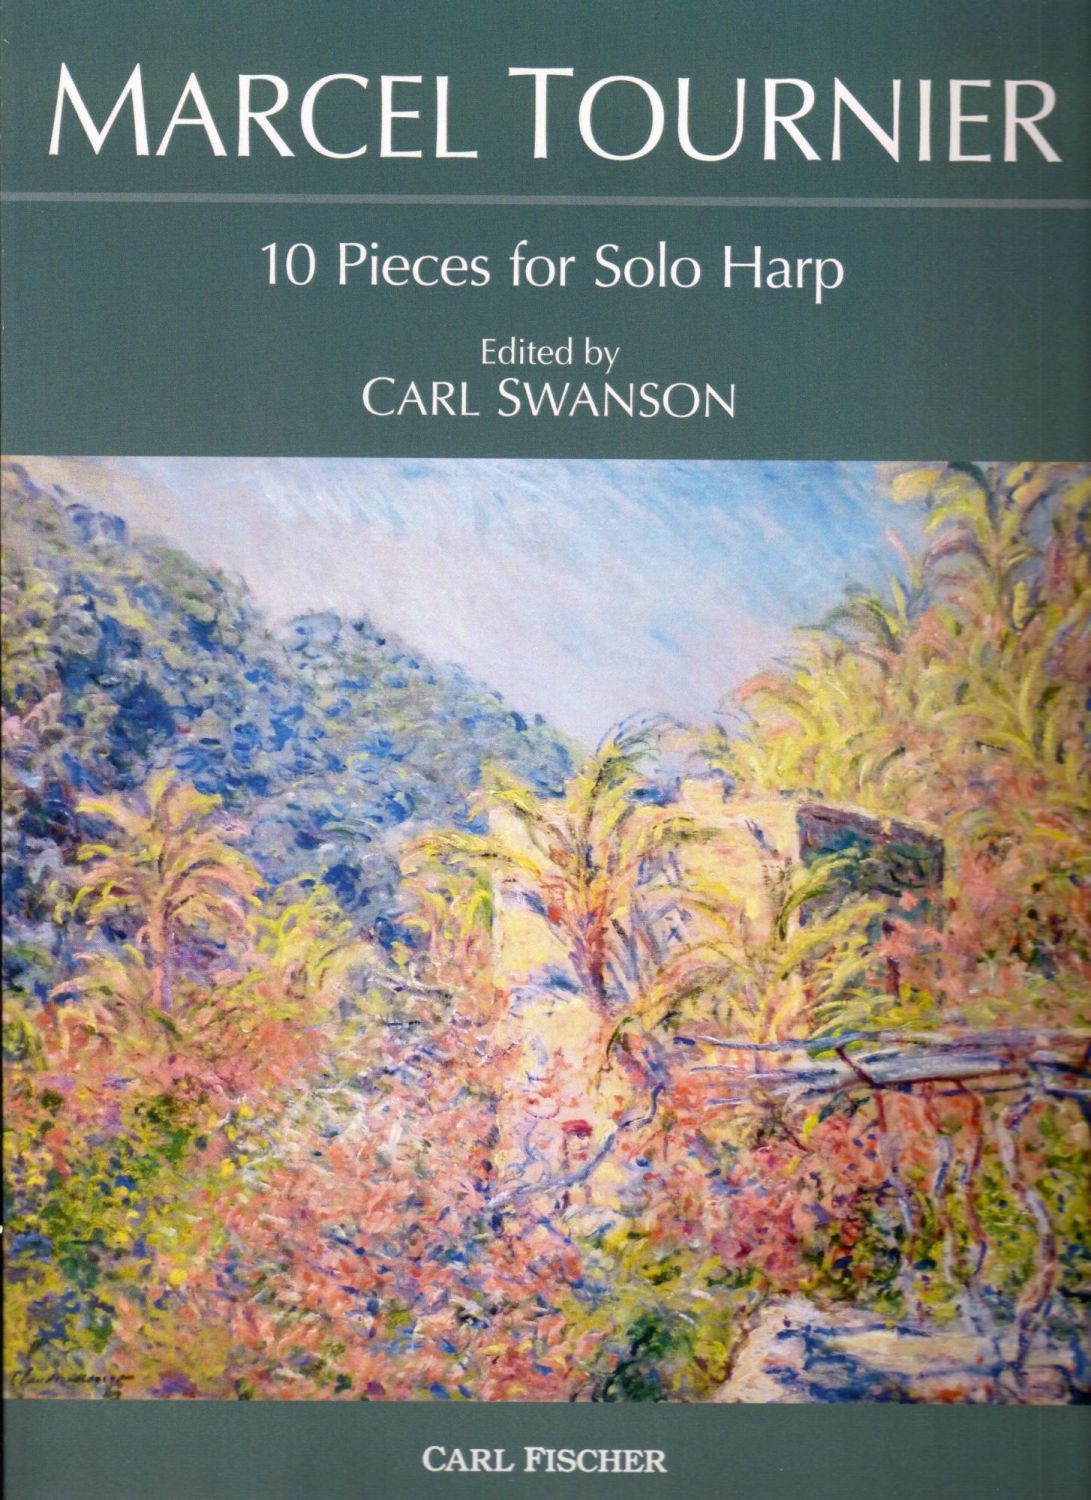 10 Pieces for Solo Harp - Marcel Tournier - edited by Carl Swanson